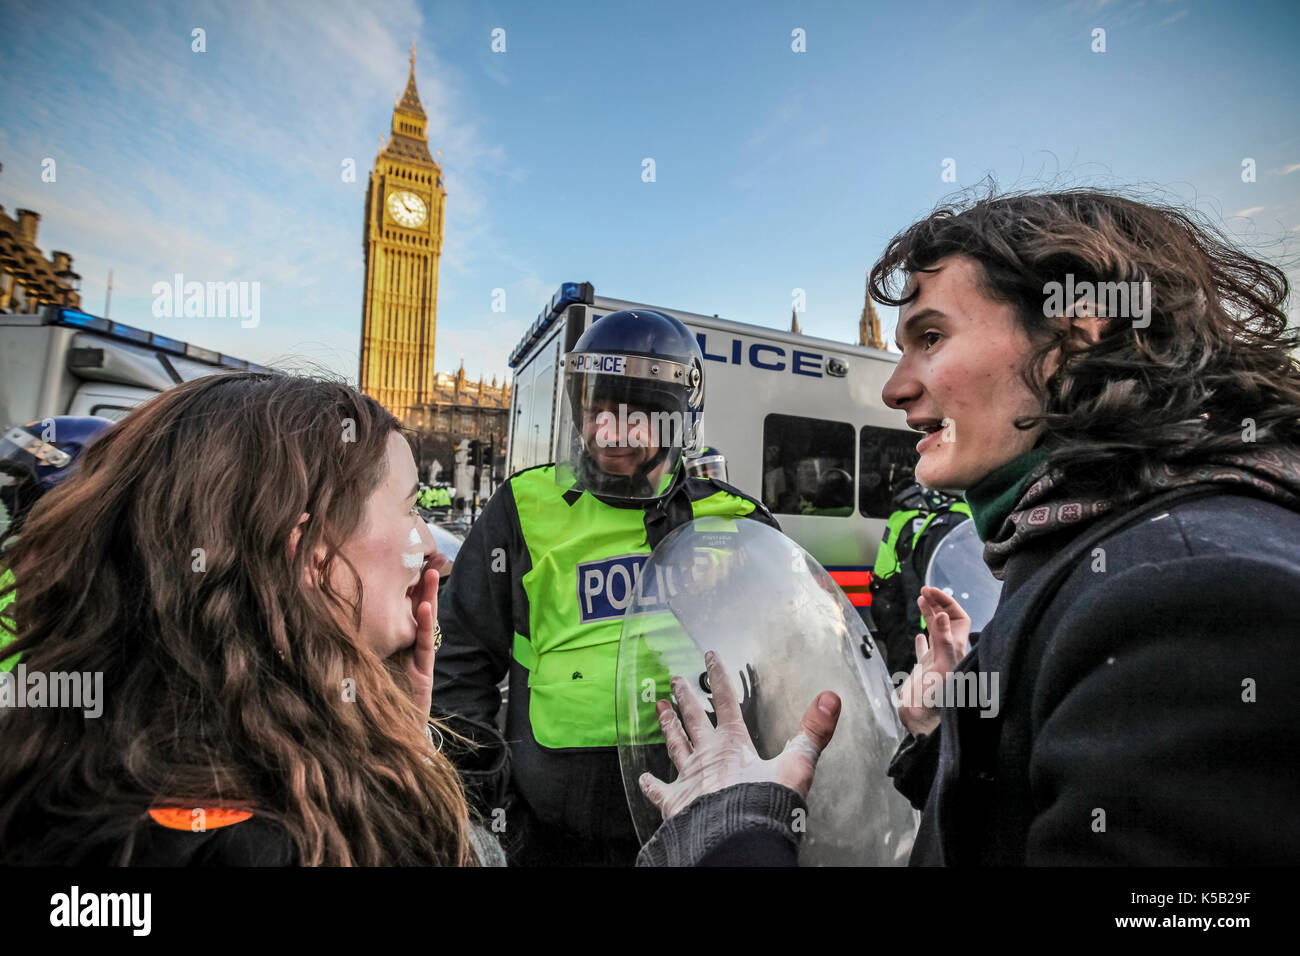 Charlie Gilmour joins the student protests and civil unrest in London against increases in university tuition fees. Stock Photo